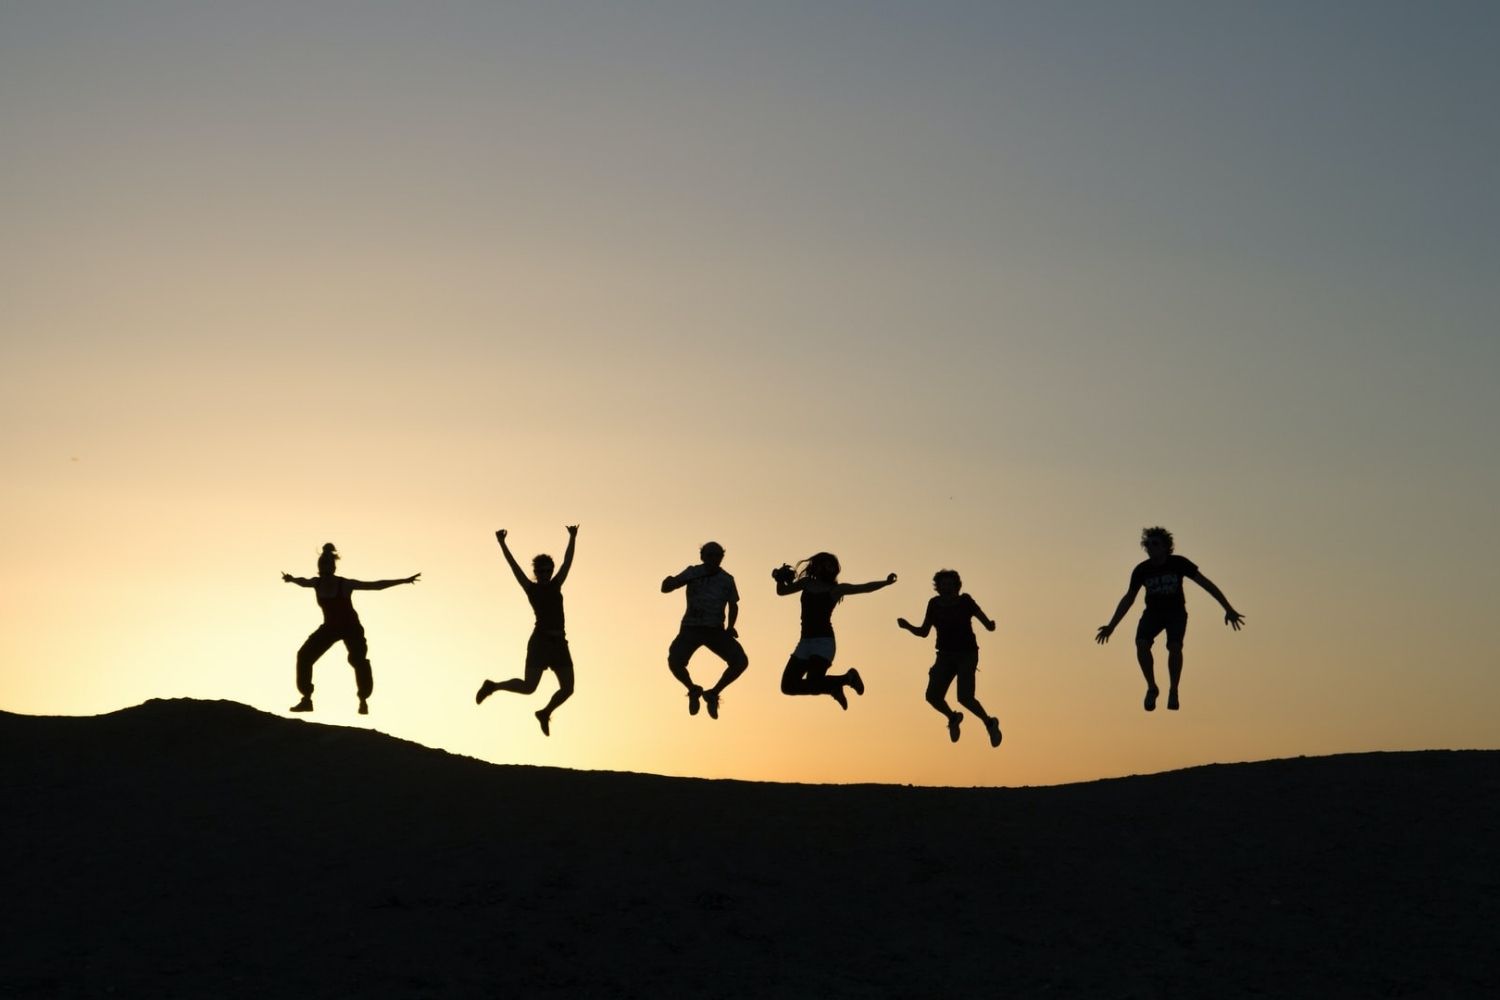 jumping group Photo by Timon Studler on Unsplash